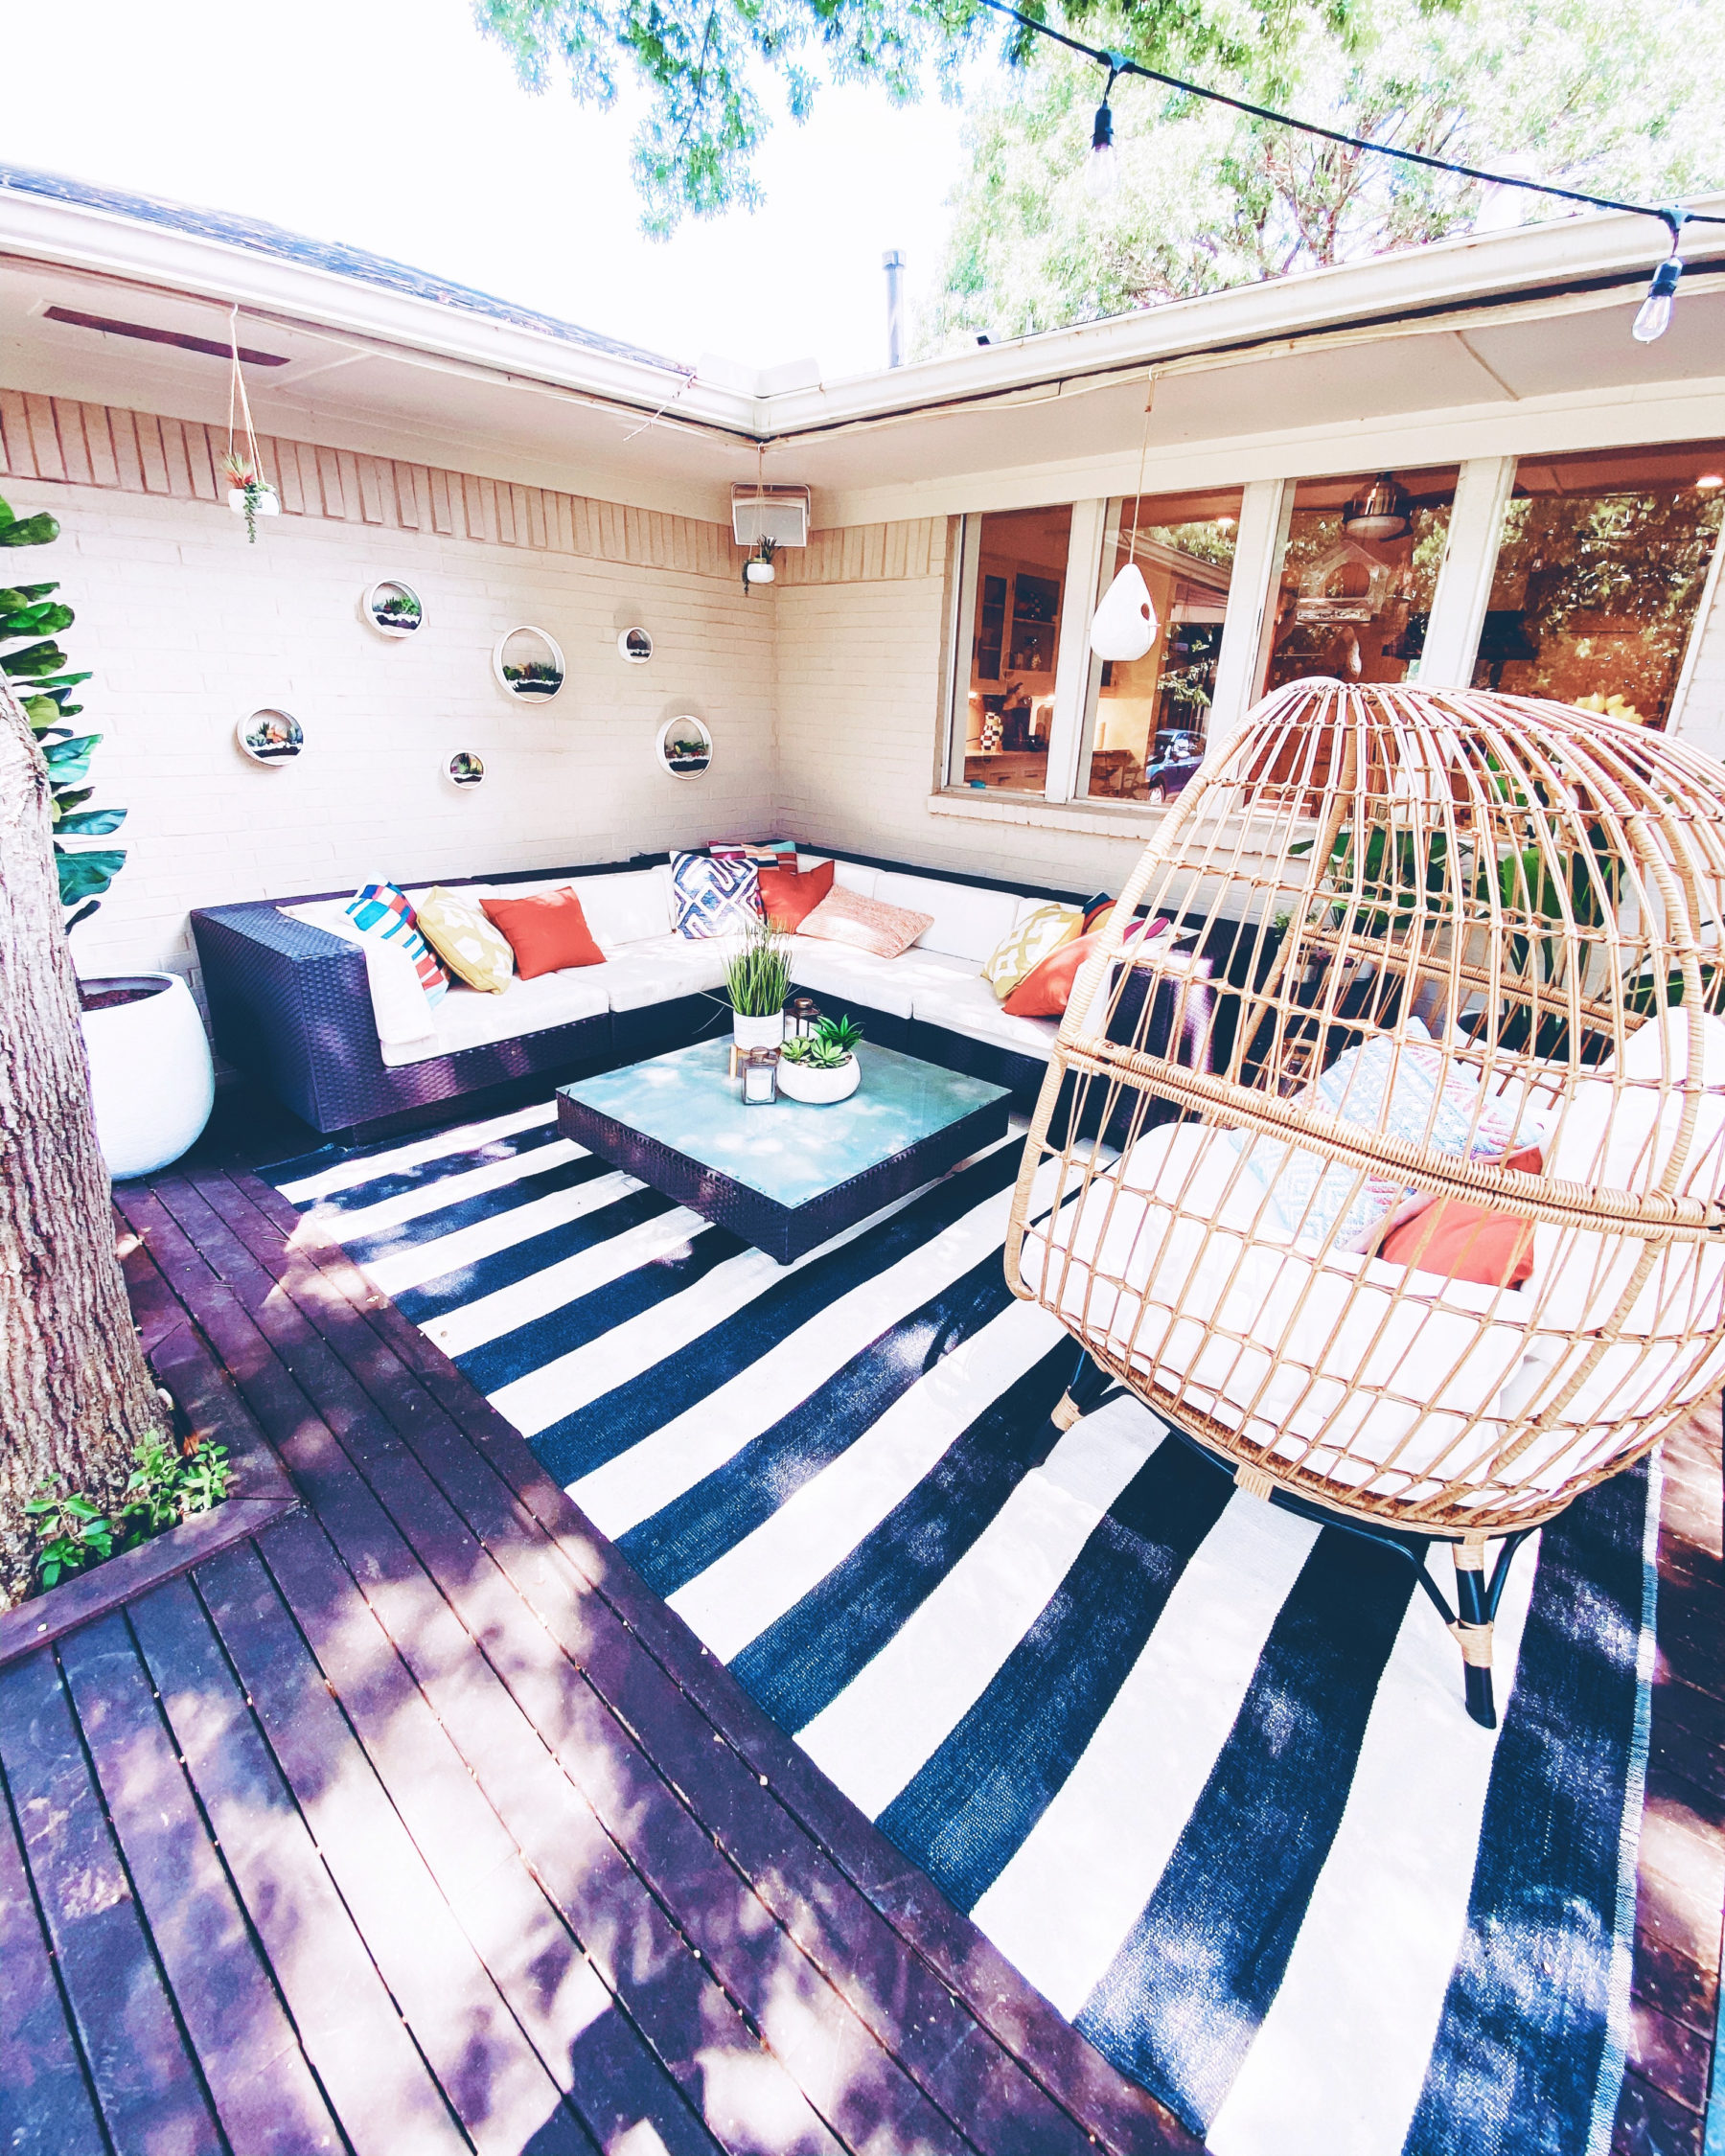 cute & little | dallas lifestyle blog | mid-century modern outdoor patio decorating ideas | egg chair, striped rug, brick wall planters, sectional | Mid Century Modern Backyard by popular Dallas lifestyle blog, Cute and Little: image of a backyard decorated with a Target Southport Patio Egg Chair, World Market Multicolor Ladder Stripe Indoor Outdoor Throw Pillow, World Market Blue And Ivory Geometric Indoor Outdoor Throw Pillow, World Market Arabesque Indoor Outdoor Throw Pillow, World Market Solid Outdoor Throw Pillow, World Market Woven Boucle Stripe Indoor Outdoor Lumbar Pillow, World Market Ceramic Sevilla Outdoor Planter, Boutique Rugs Douds Area Rug, West Elm Simple Wood Lanterns, Target Vickerman Artificial Potted Bird of Paradise Palm Tree, Pottery Barn Faux Potted Succulent in Ceramic Bowl, outdoor sectional couch and Target 12" x 10" Artificial Eucalyptus Plant Arrangement in Pot.